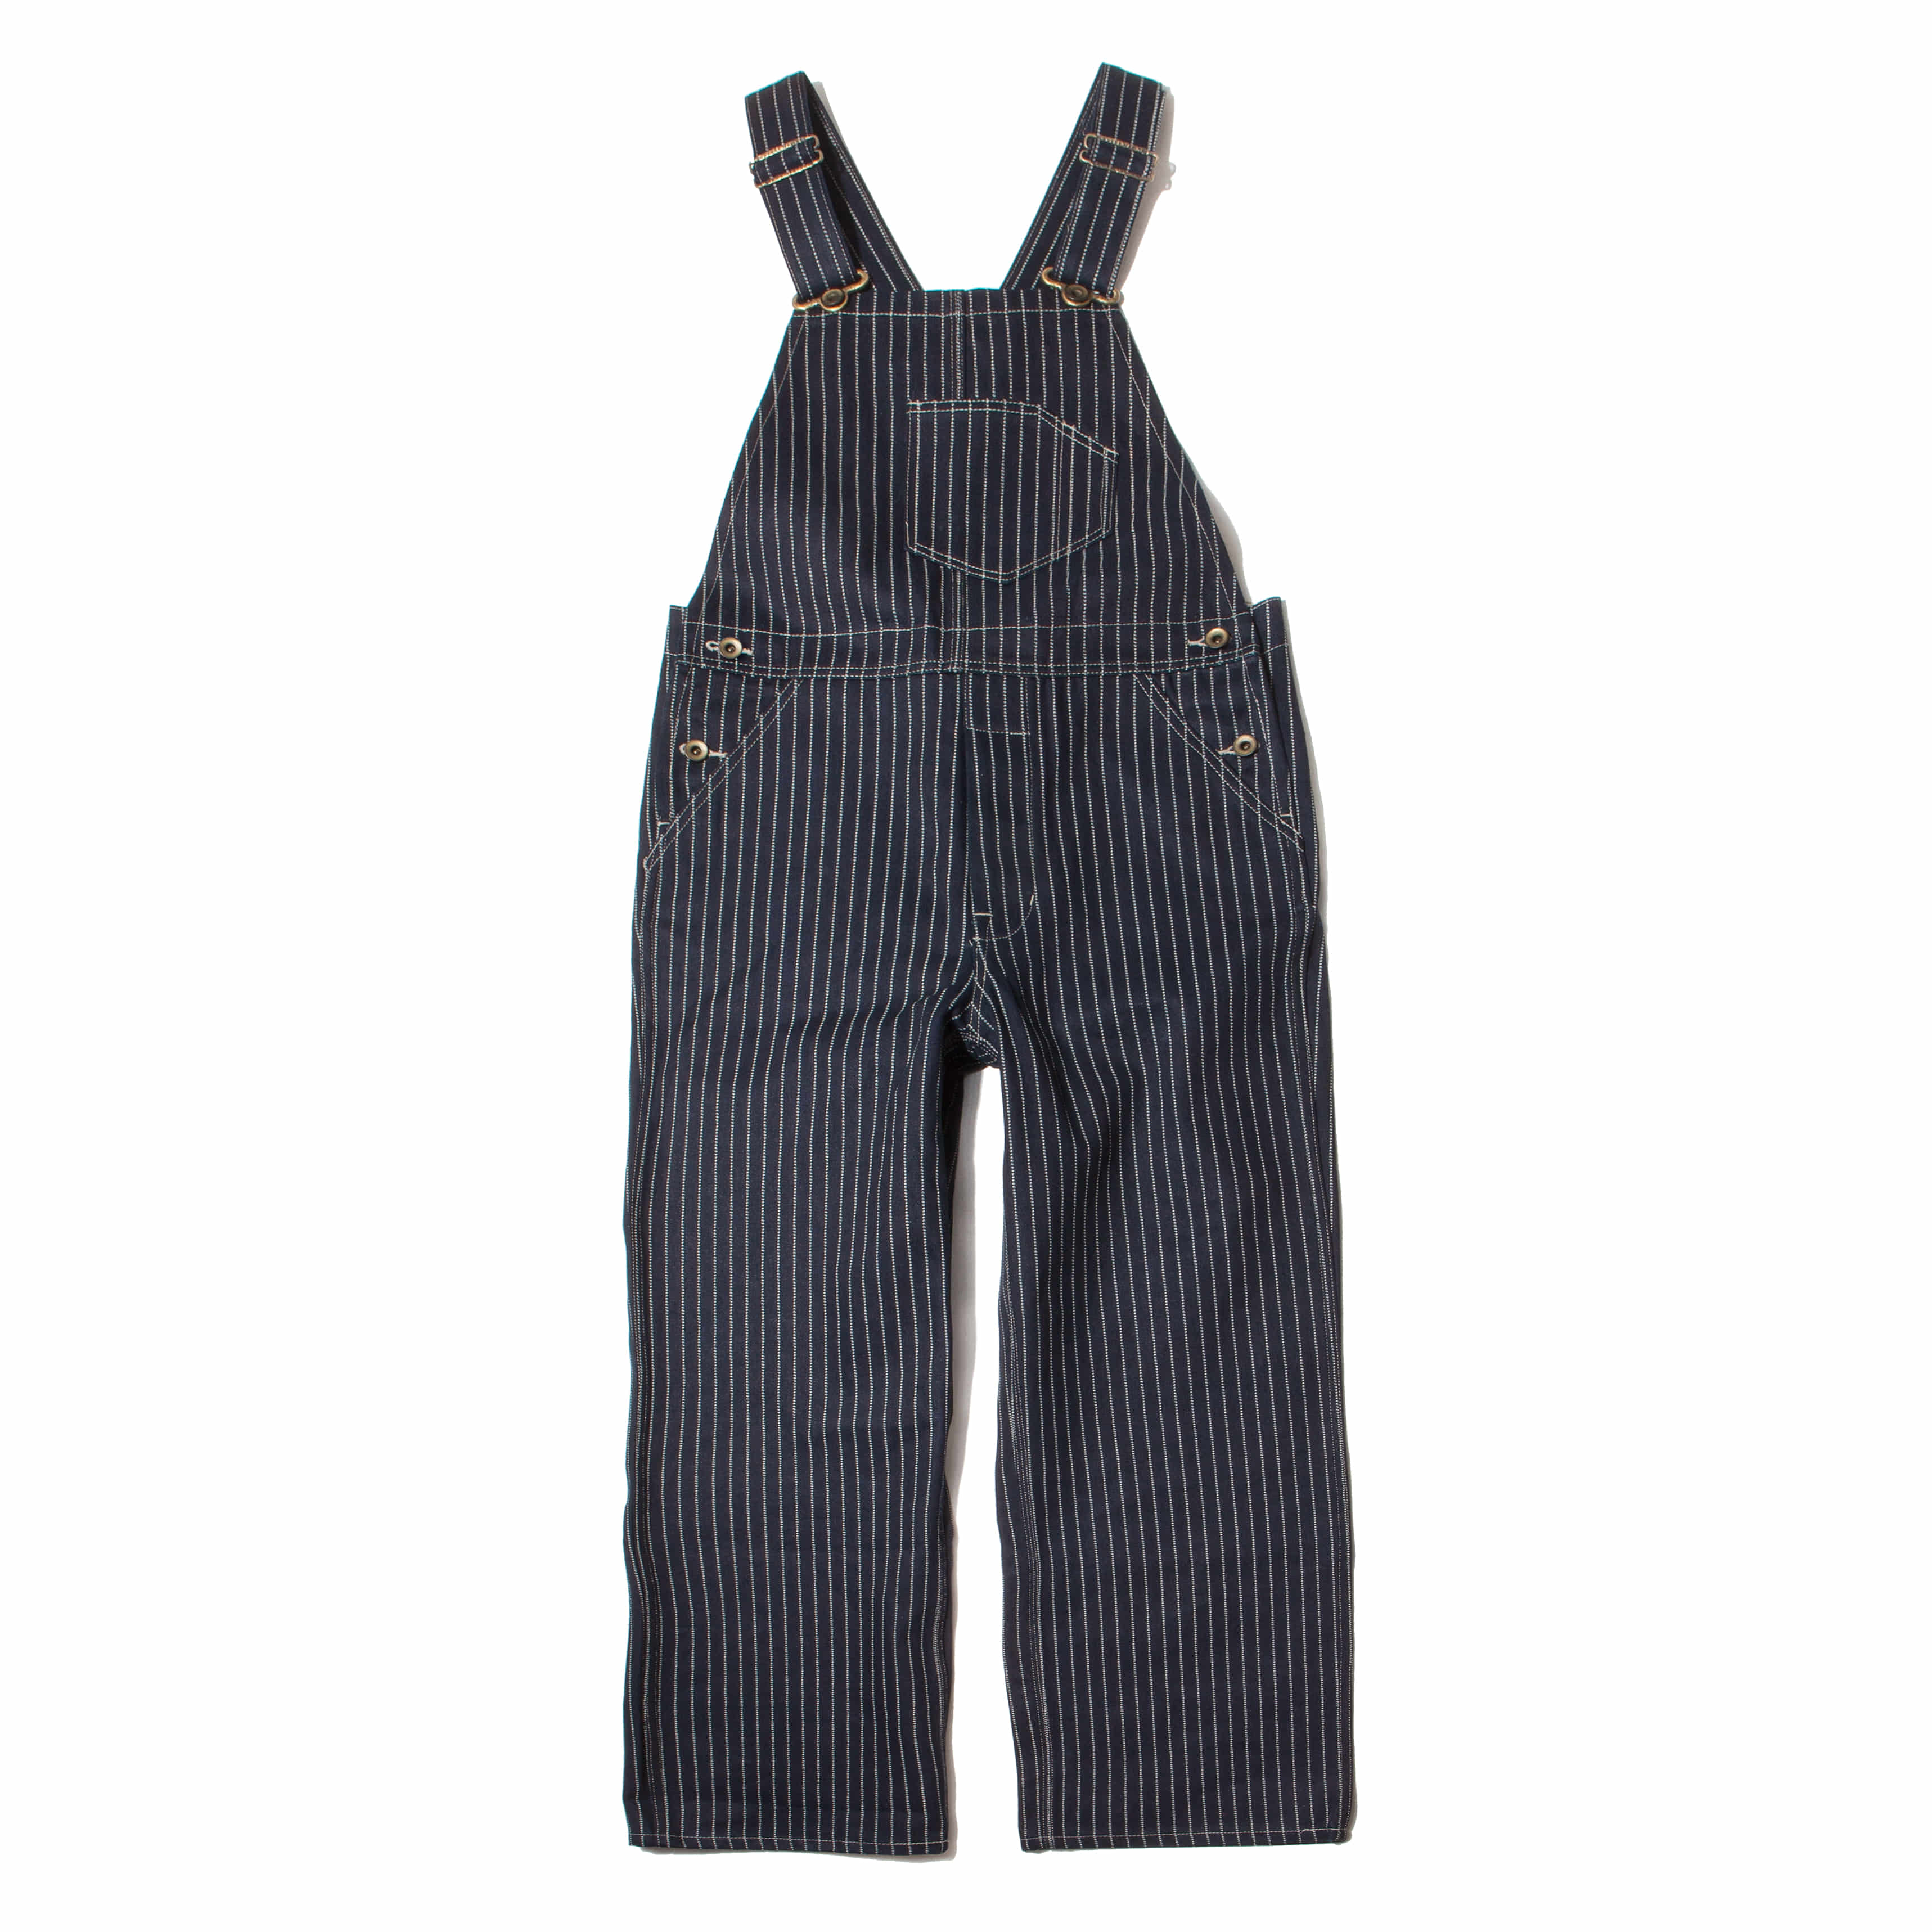 LOW BACK TYPE WABASH OVERALLS